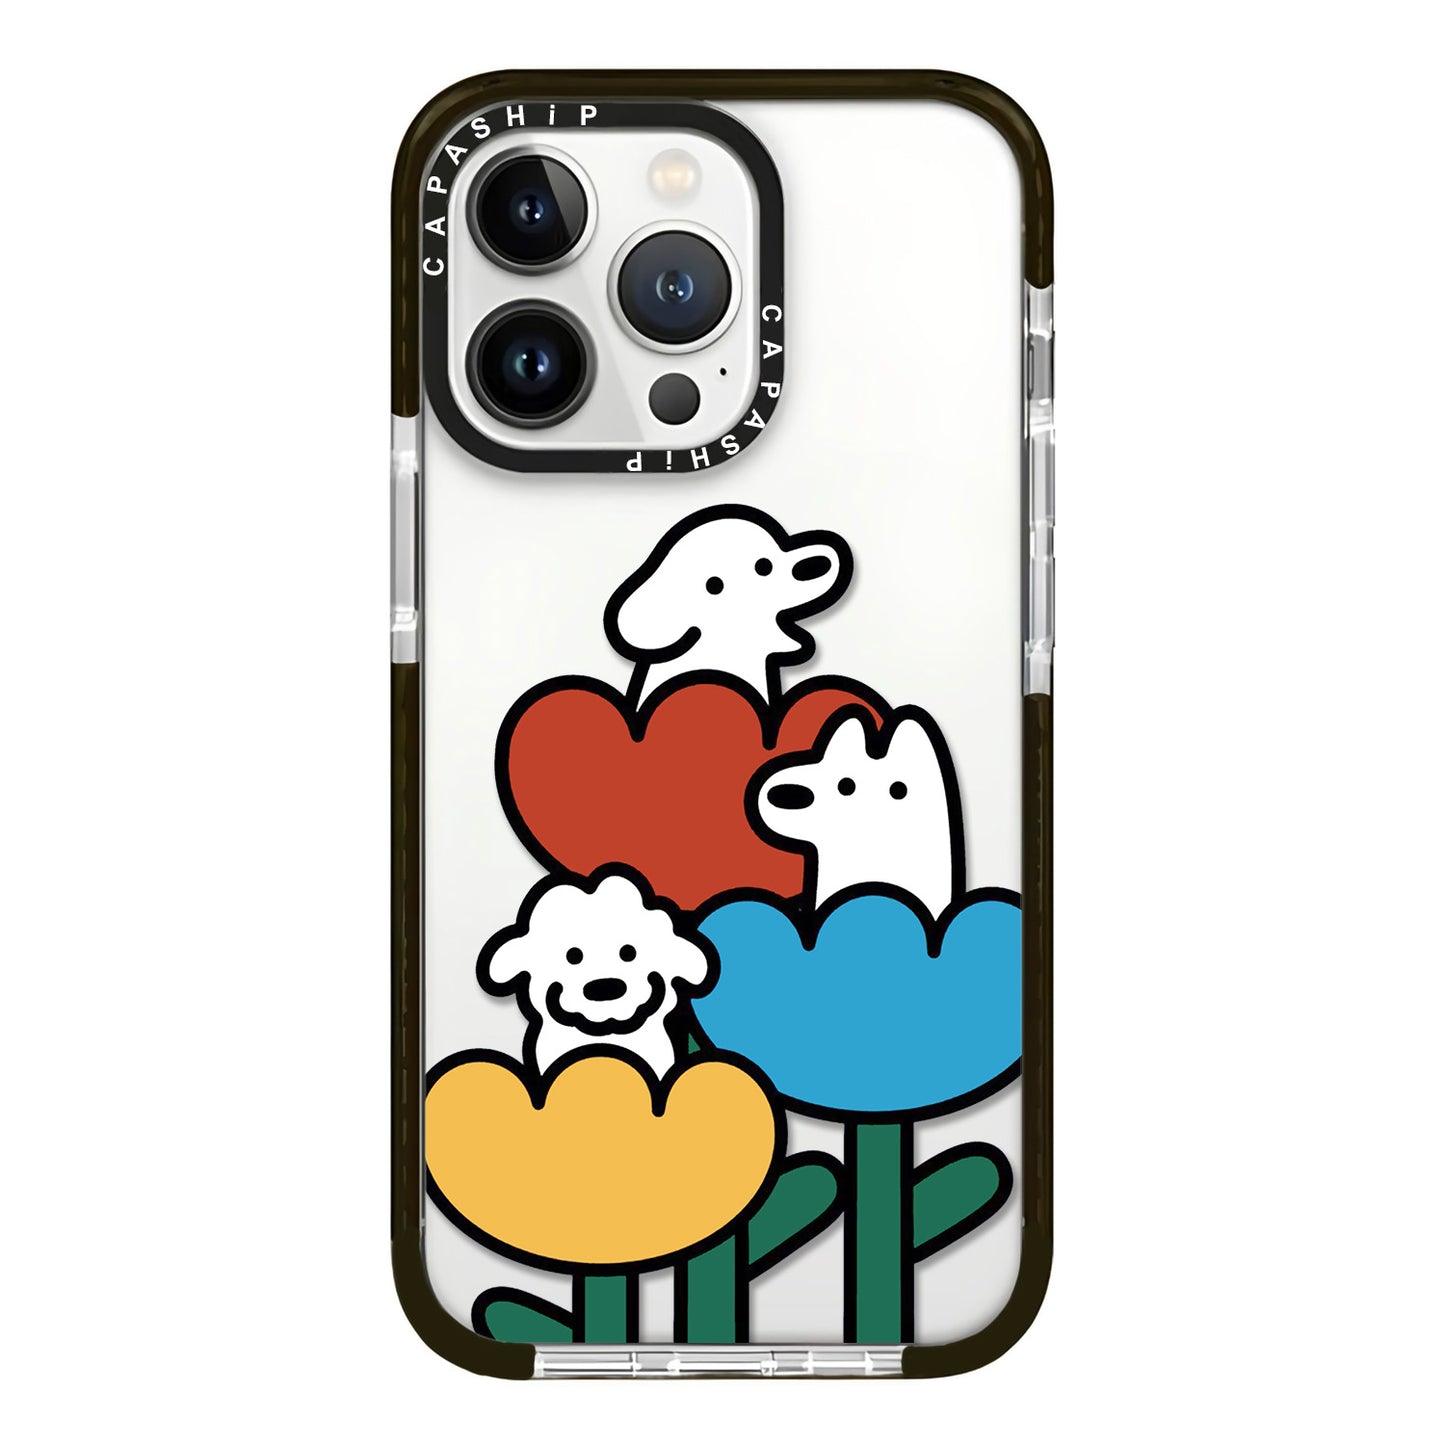 Cute dog phone case for iPhone